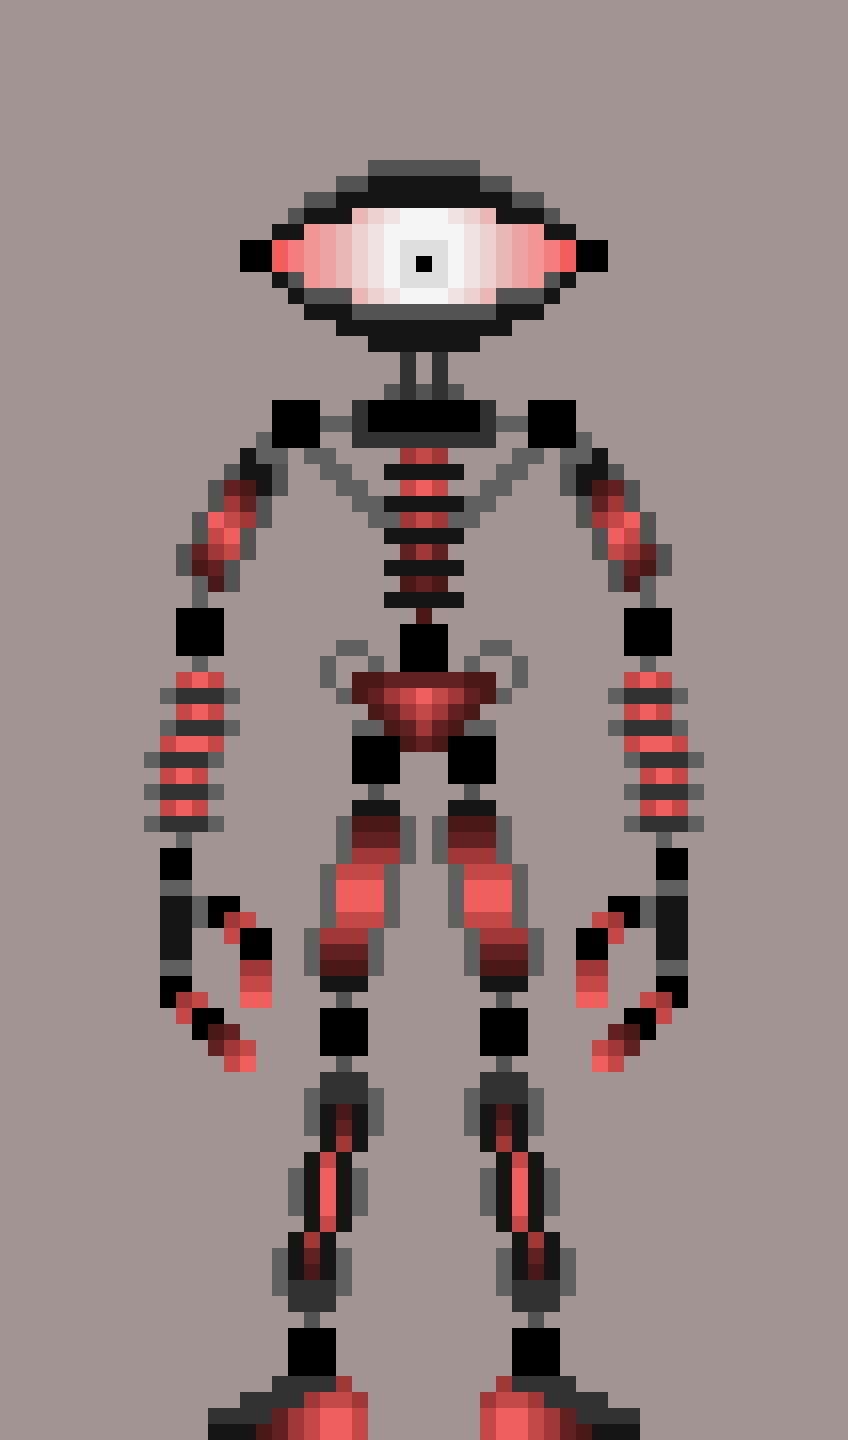 hunger-as-an-animatronic-requested-by-project-eyes